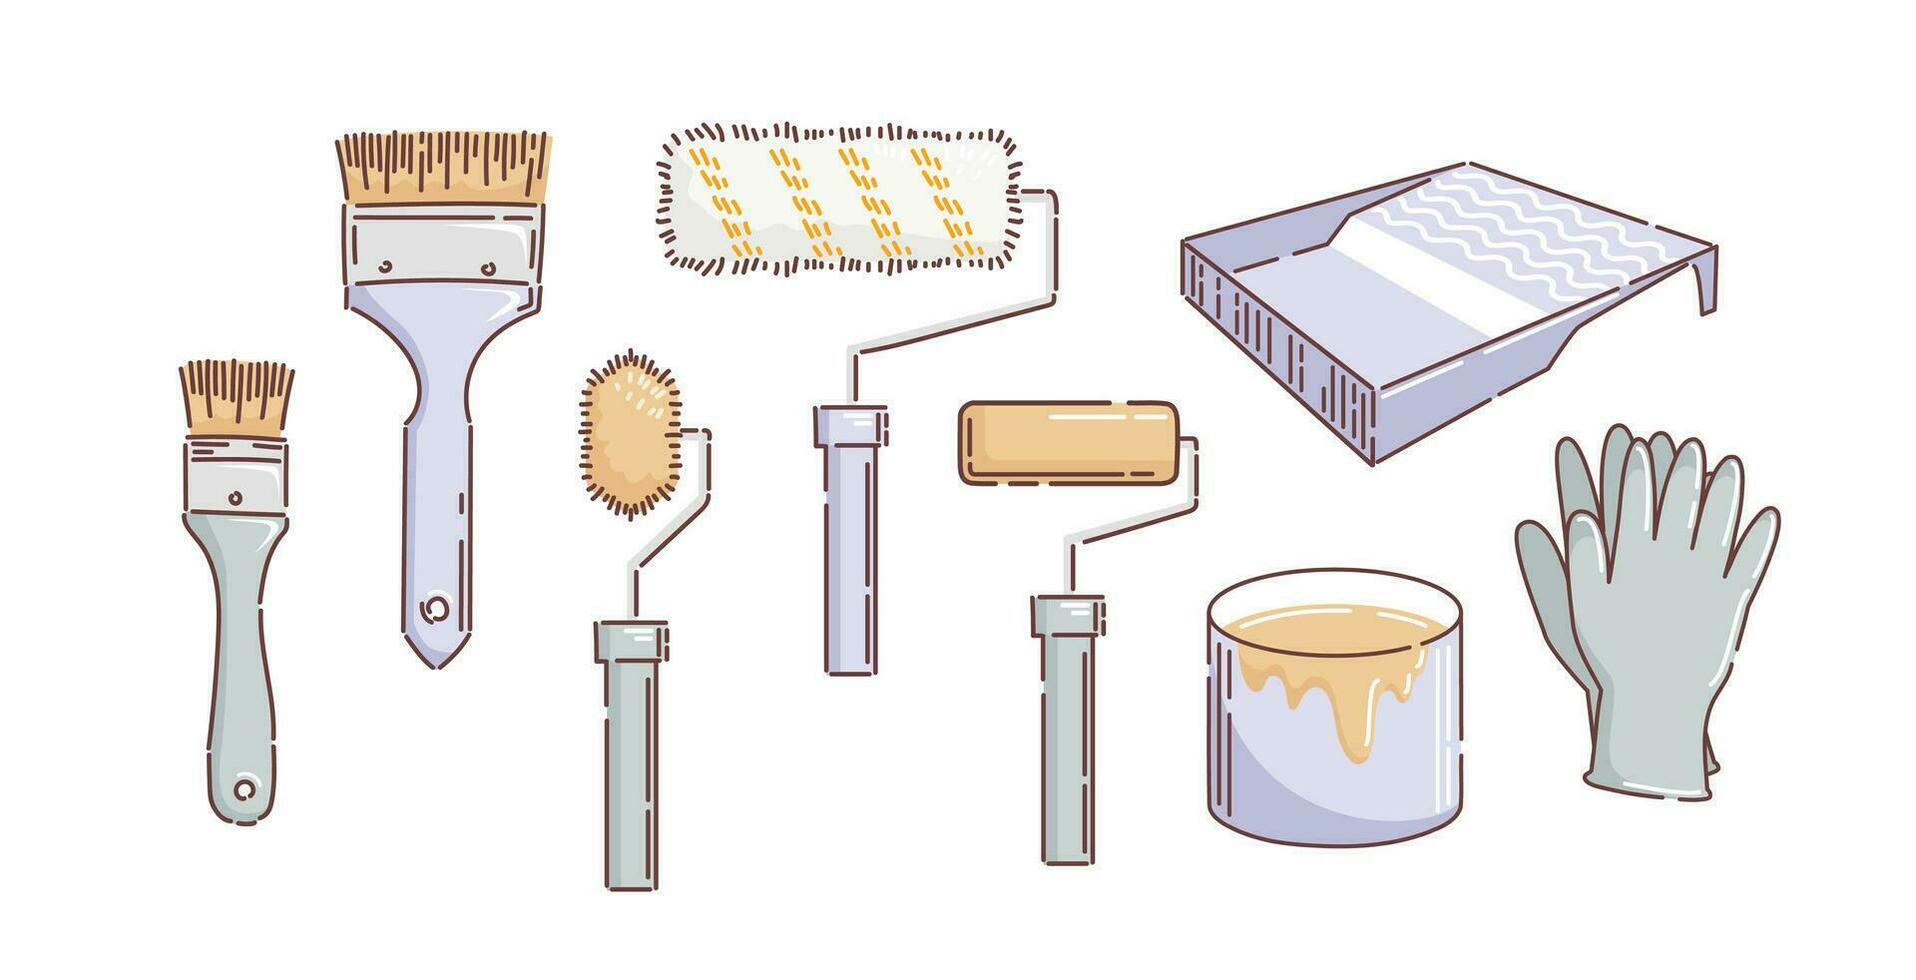 A set of brushes and rollers for painting. Cuvette for paints, gloves, a jar of enamel. Repair, building. Vector illustration in doodle style. For stickers, website, design elements